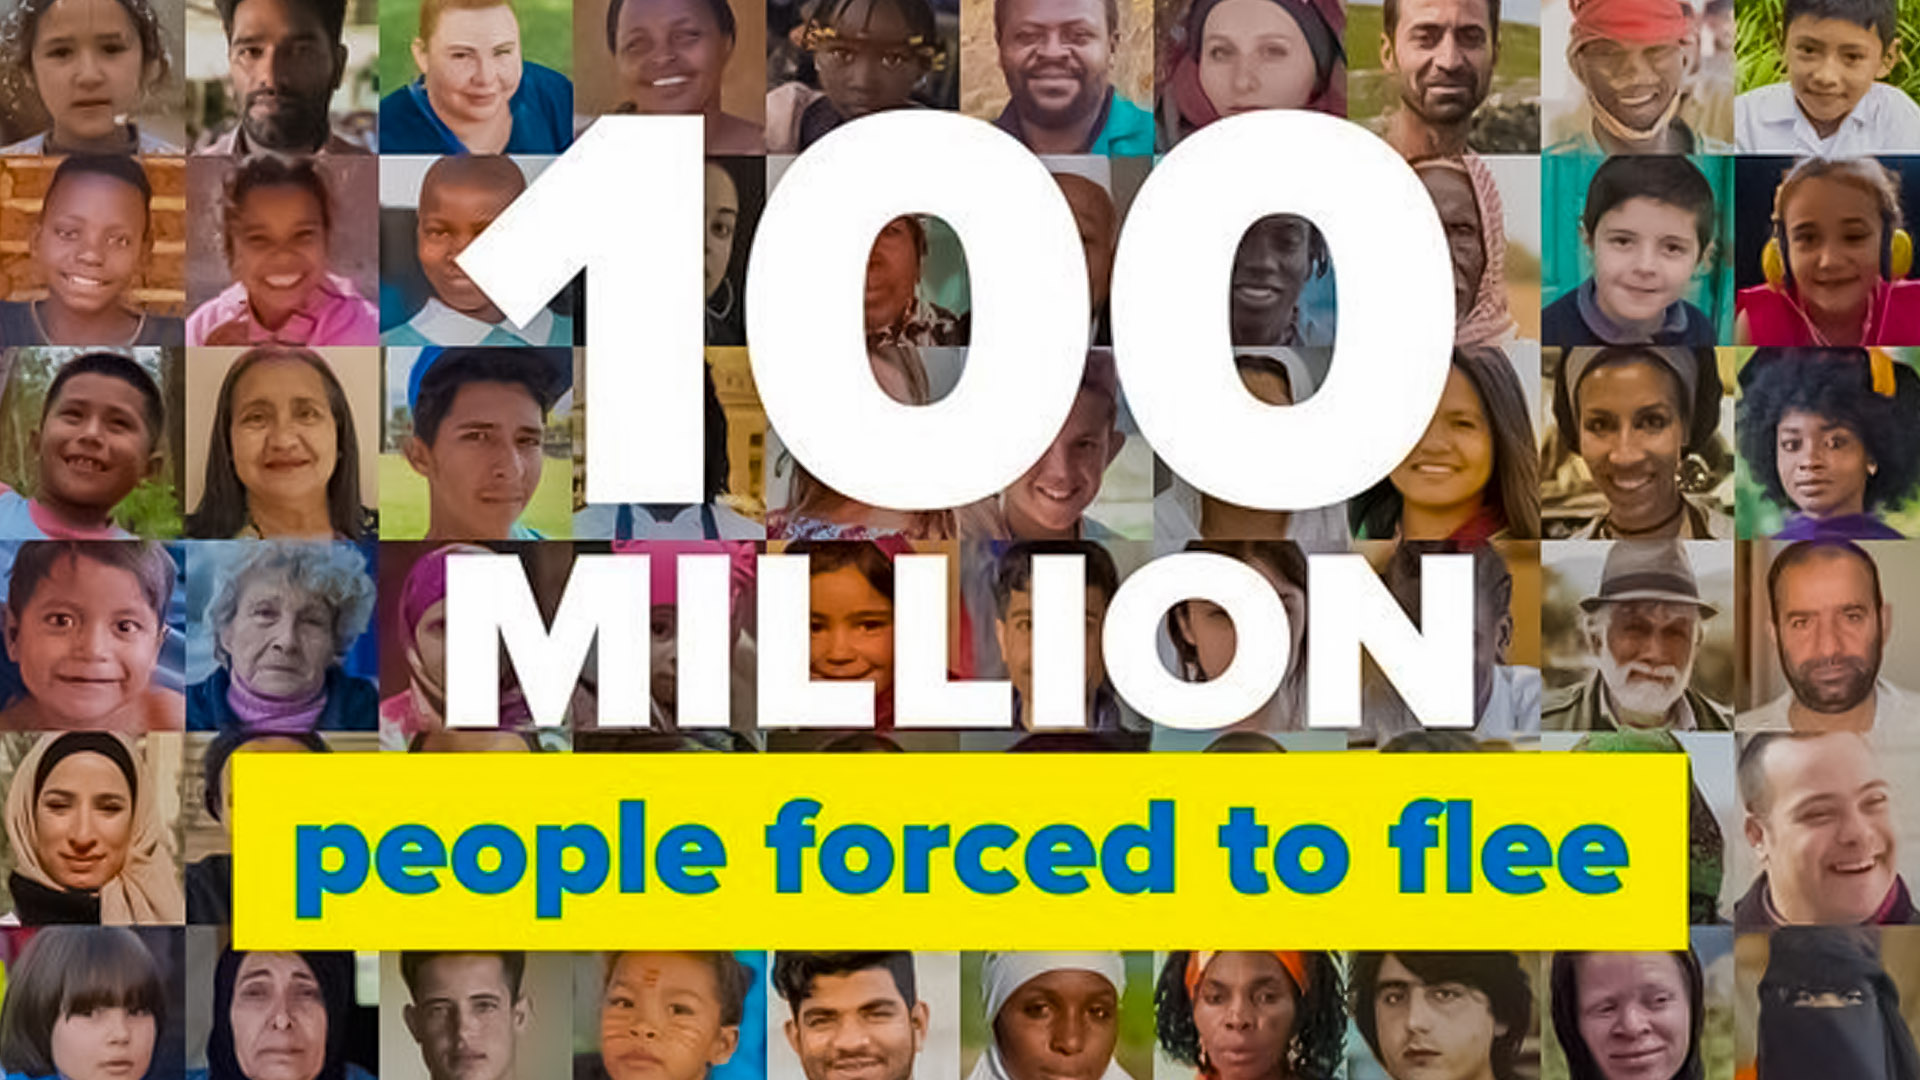 More than 100 million people forcibly displaced worldwide - UN